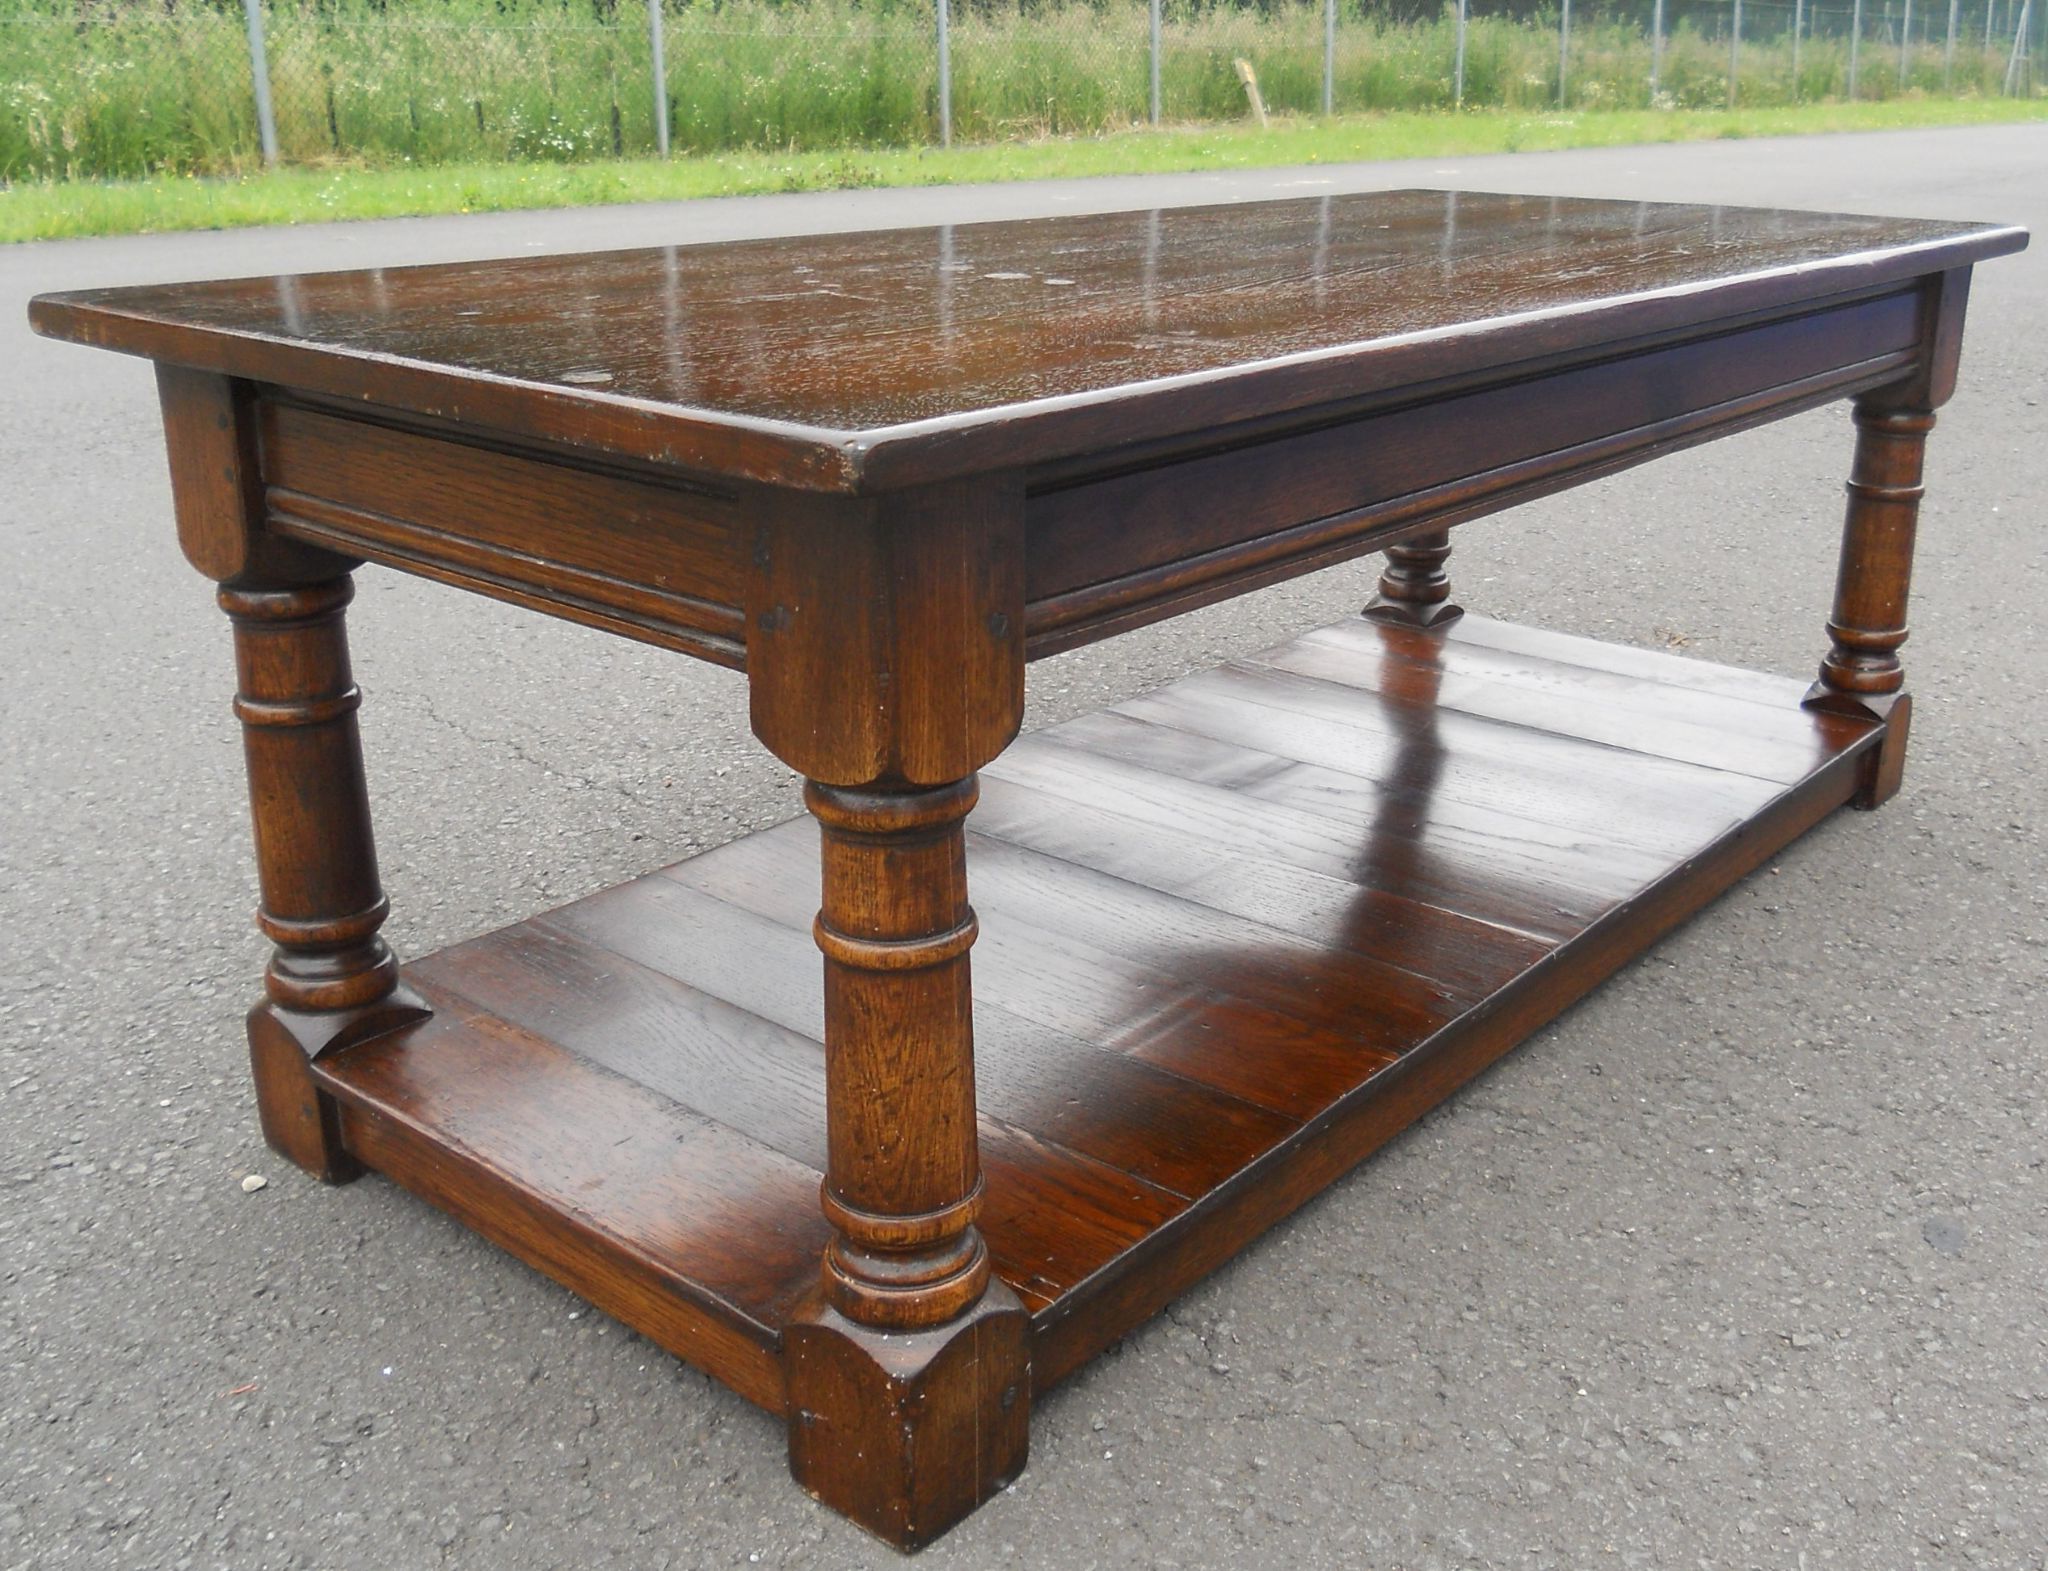 Antique White Black Coffee Tables With 2020 Long Antique Style Oak Coffee Table (View 9 of 10)